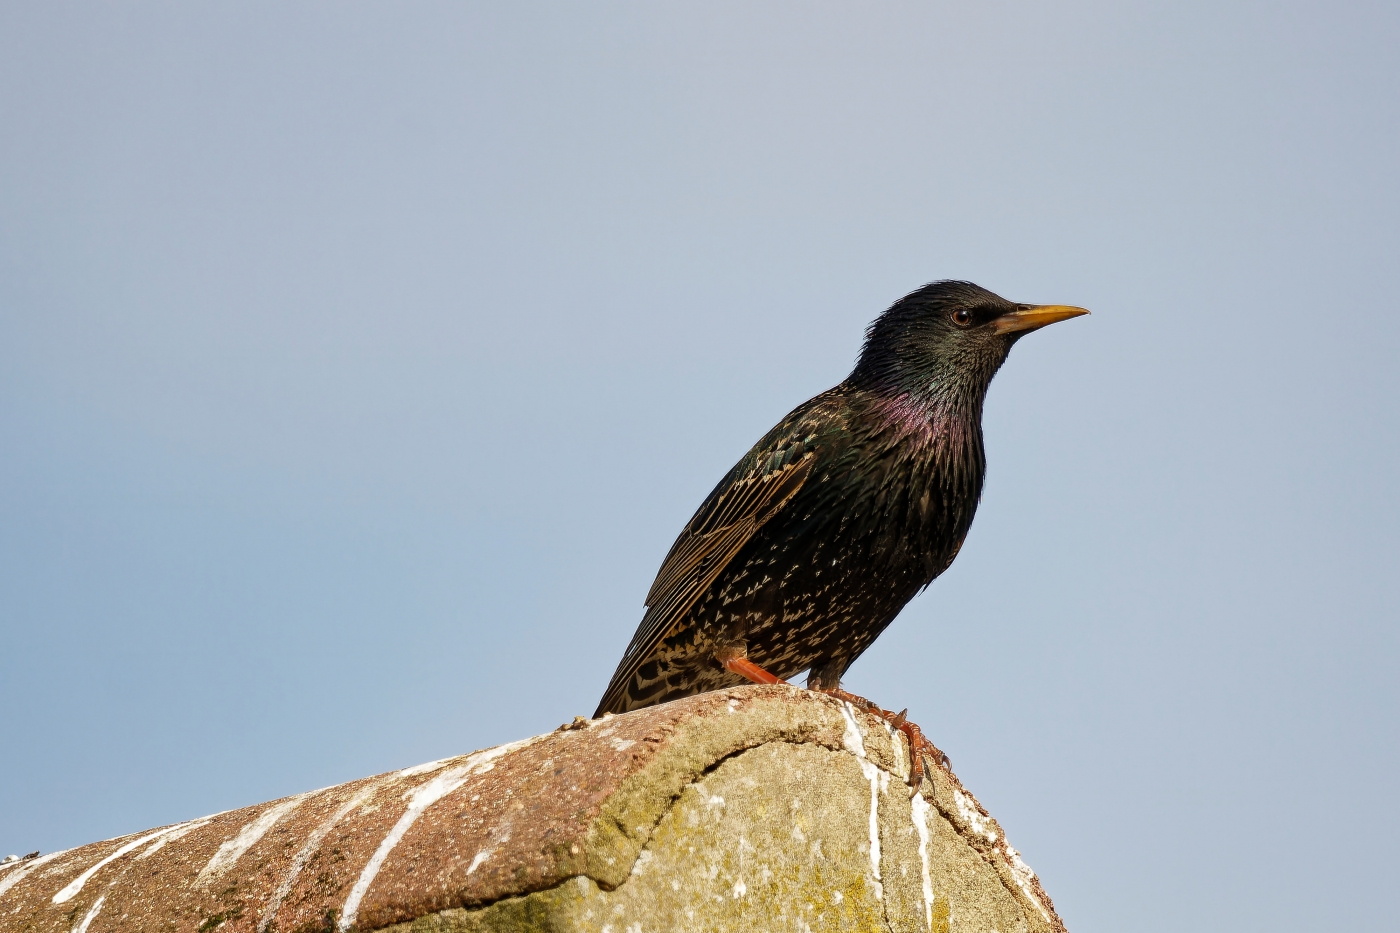 photographer dntphotographs wildlife  photo. starling sat on the roof.